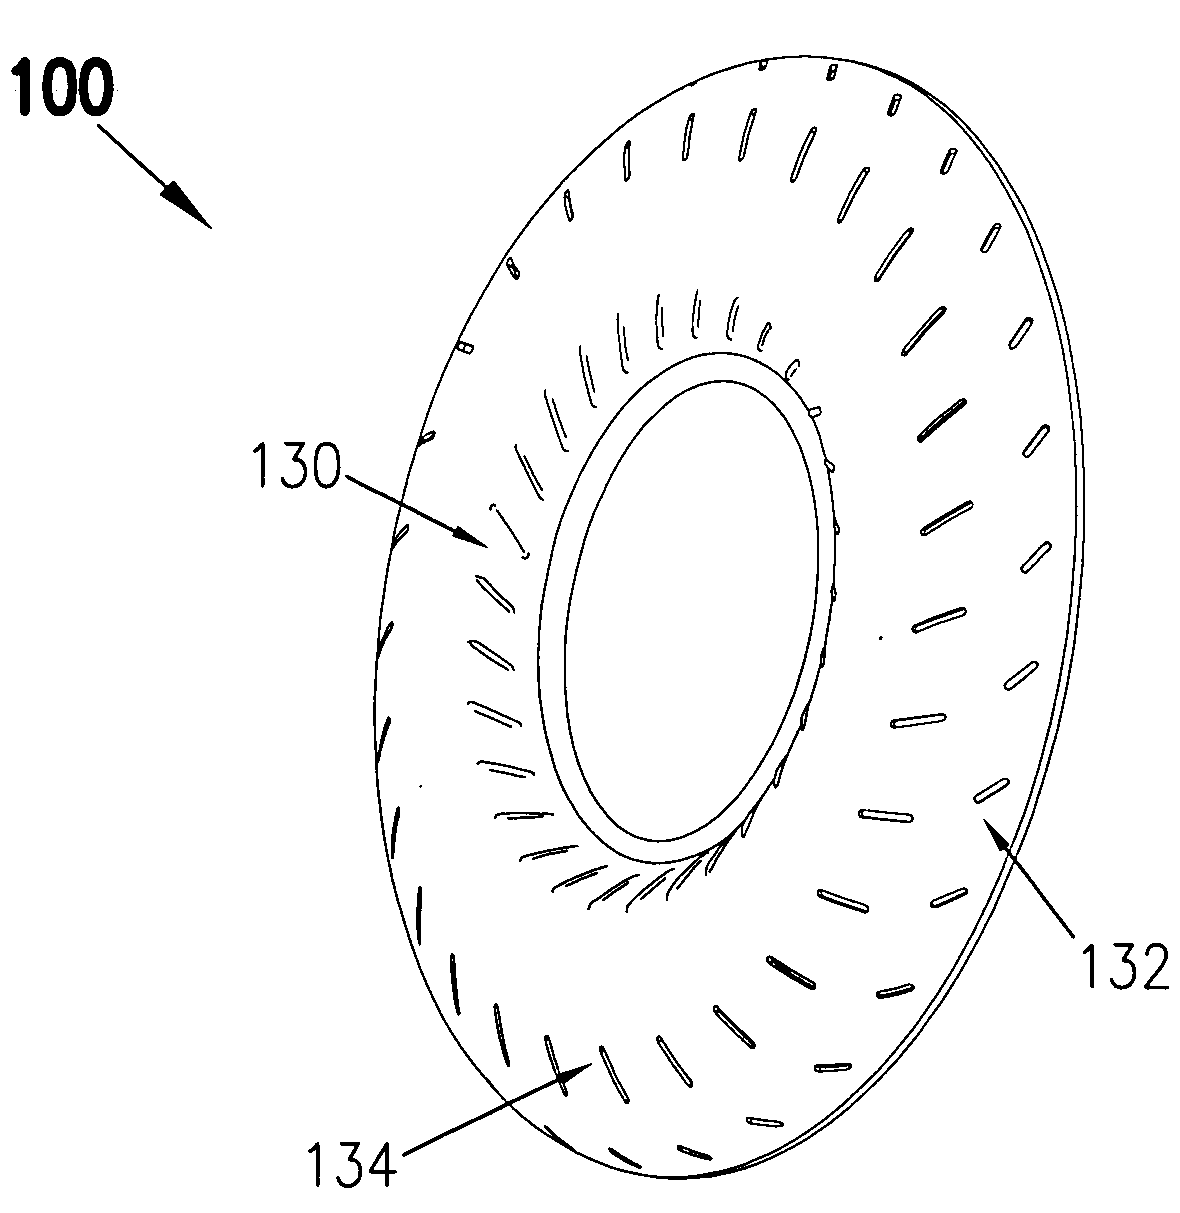 Turbine and pump shells for torque converters and methods of manufacturing